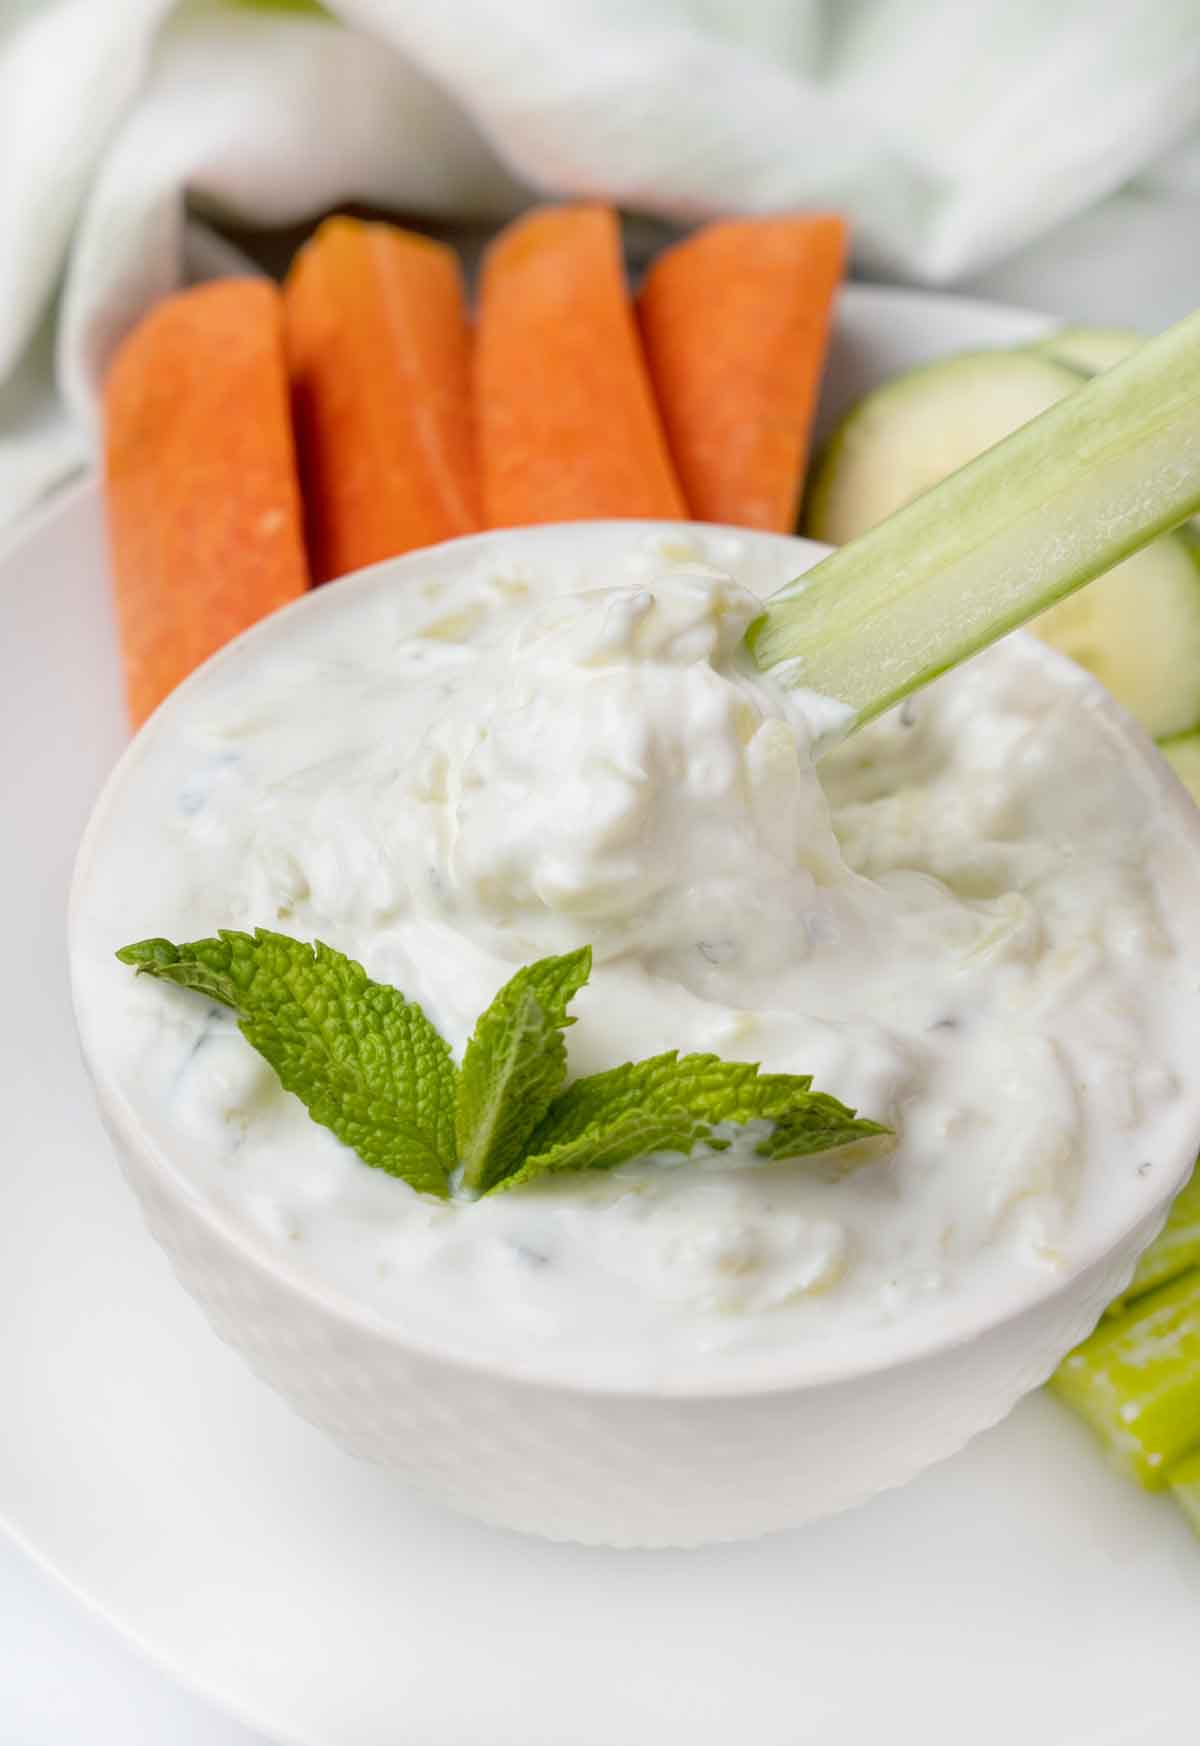 tzatziki sauce in a white bowl with a sprig of mint and carrots, and celery on a white plate.